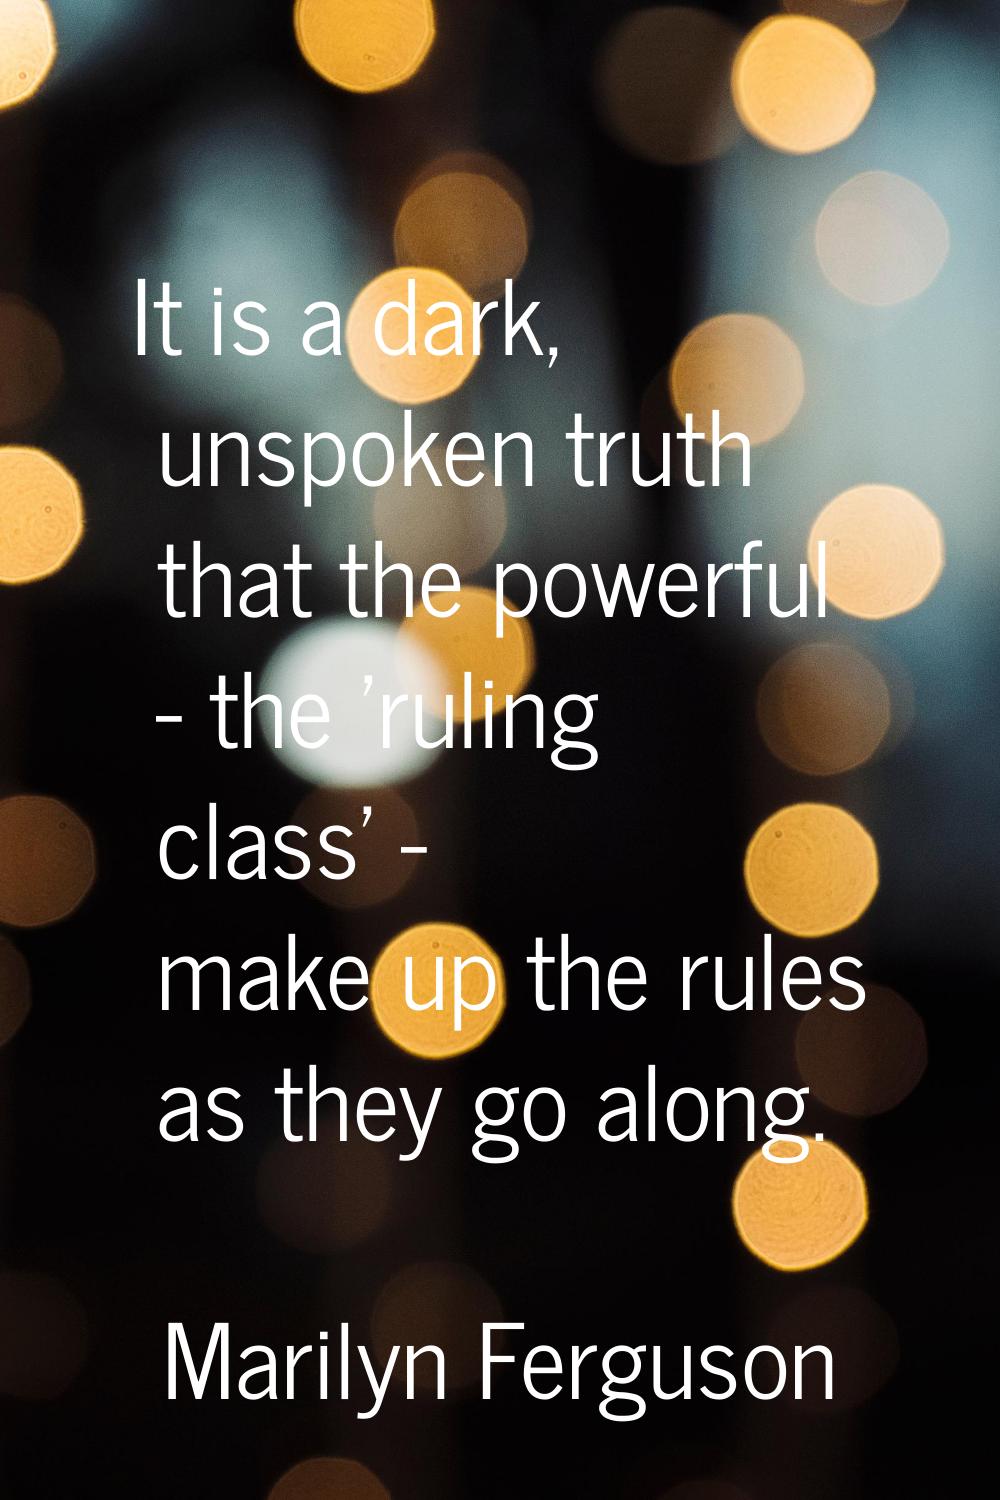 It is a dark, unspoken truth that the powerful - the 'ruling class' - make up the rules as they go 